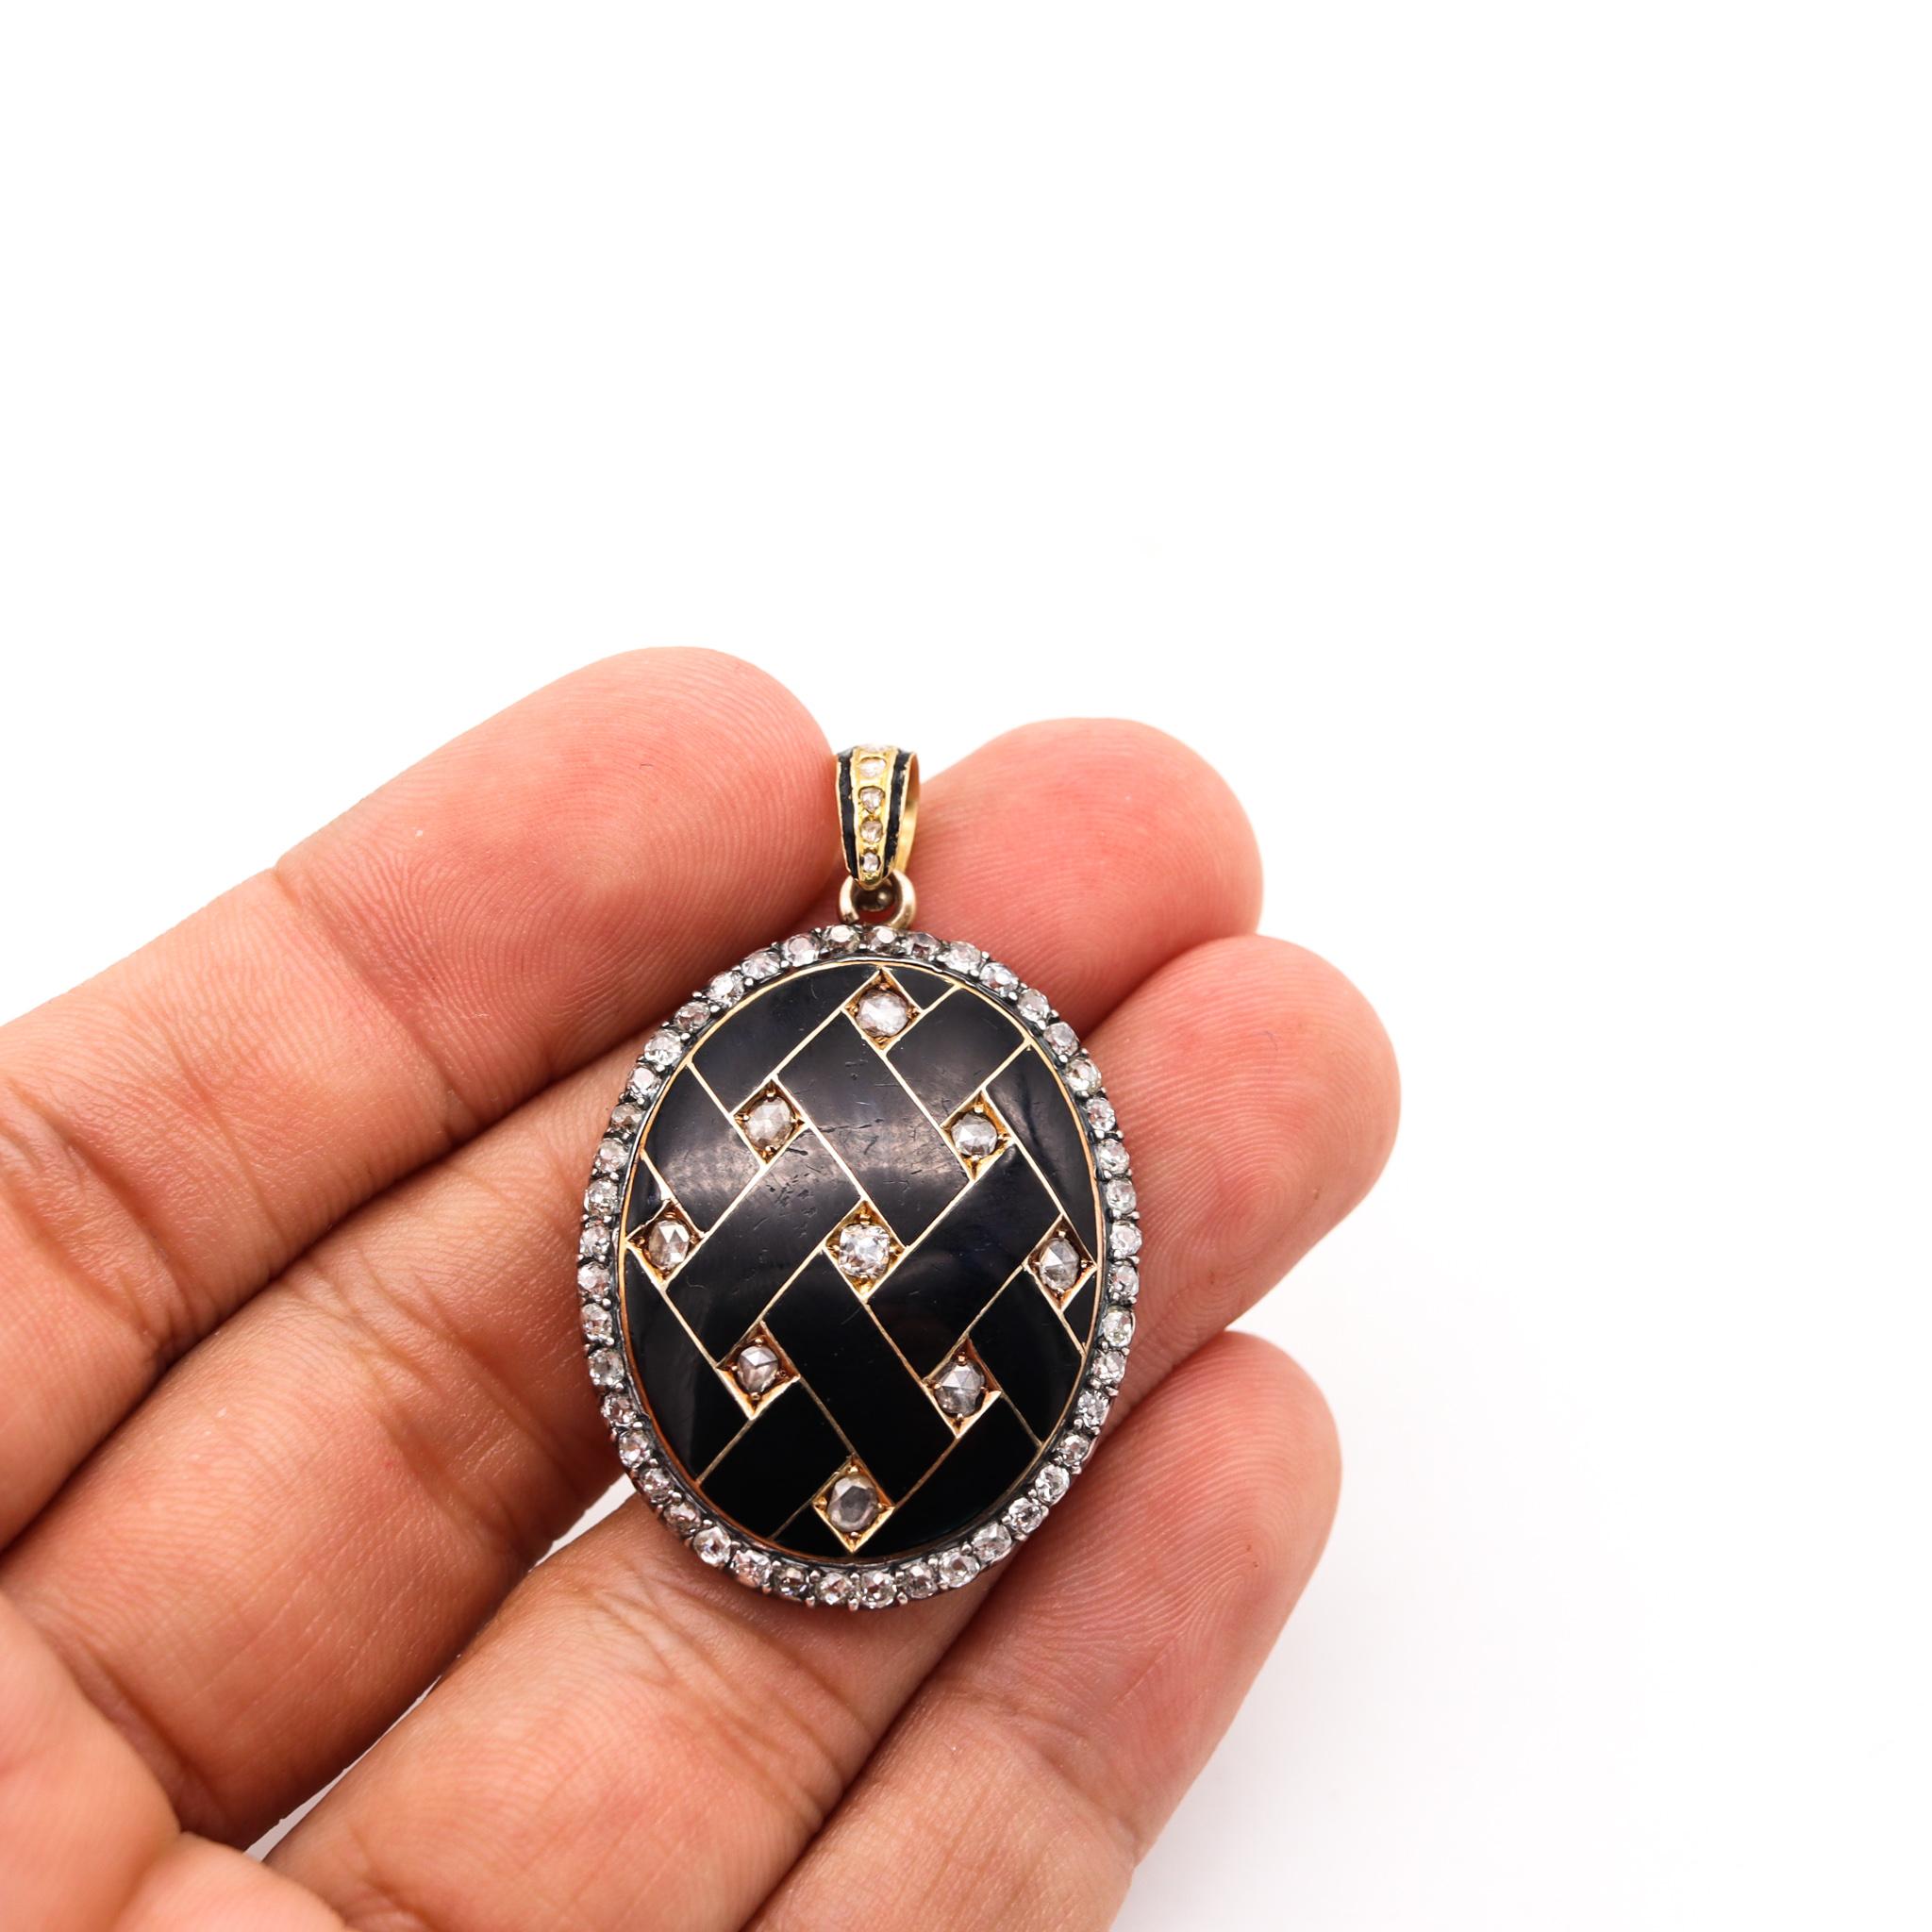 Victorian 1870 Geometric Enameled Oval Pendant Locket in 18kt Gold with Diamonds In Excellent Condition For Sale In Miami, FL